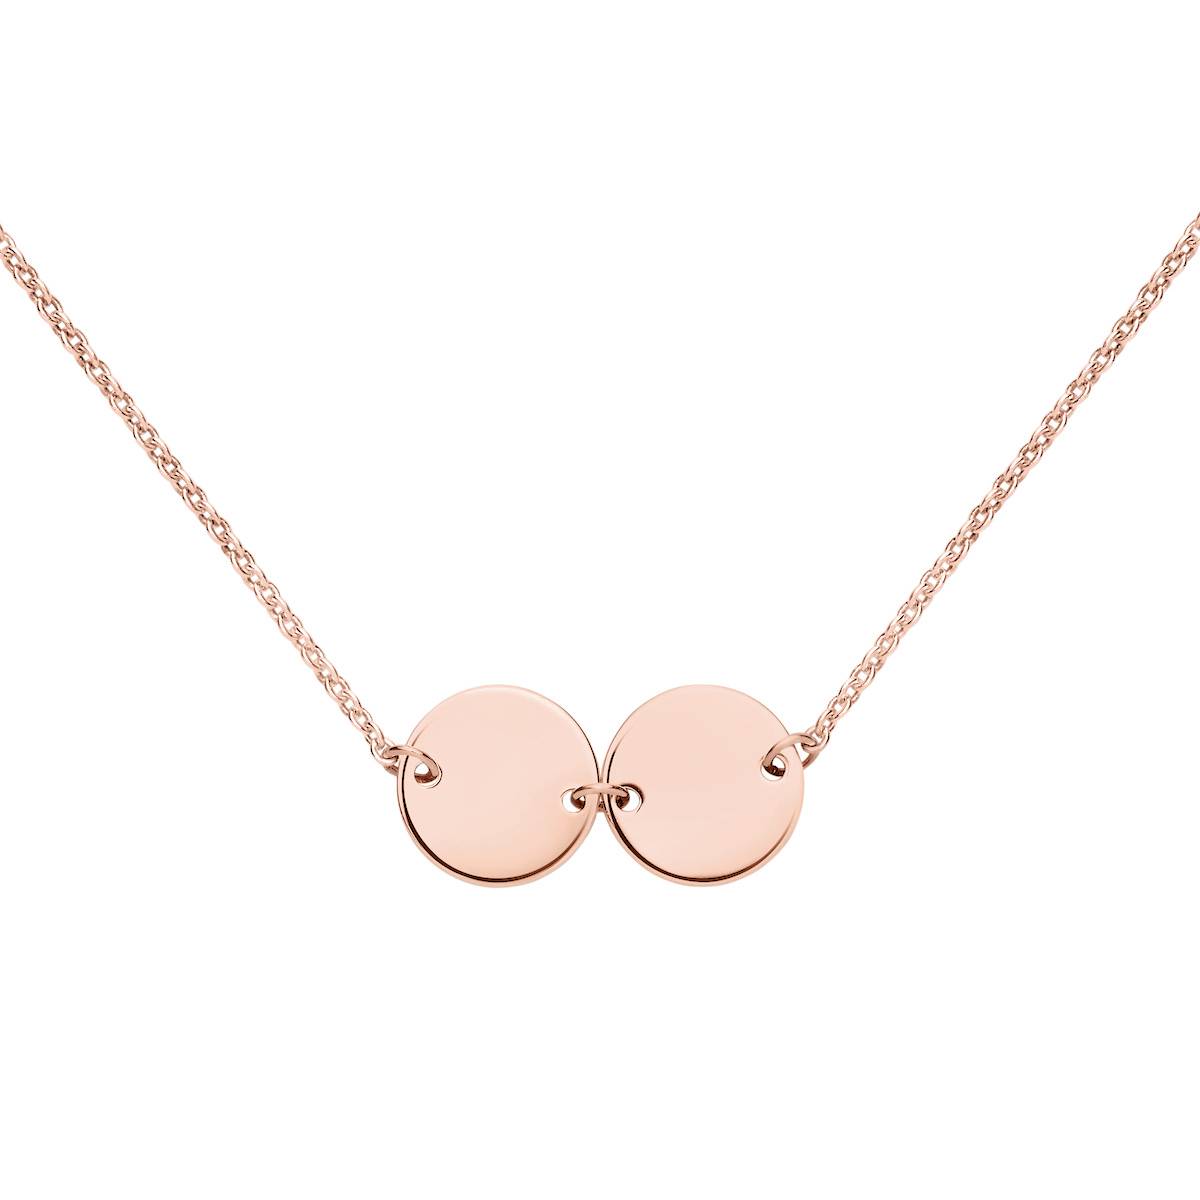 Buy Brilliant Expressions 10K Rose Gold 1/5 Cttw Conflict Free Diamond  Circle Adjustable Pendant Necklace (I-J Color, I2-I3 Clarity), 16-18 inch  at Amazon.in